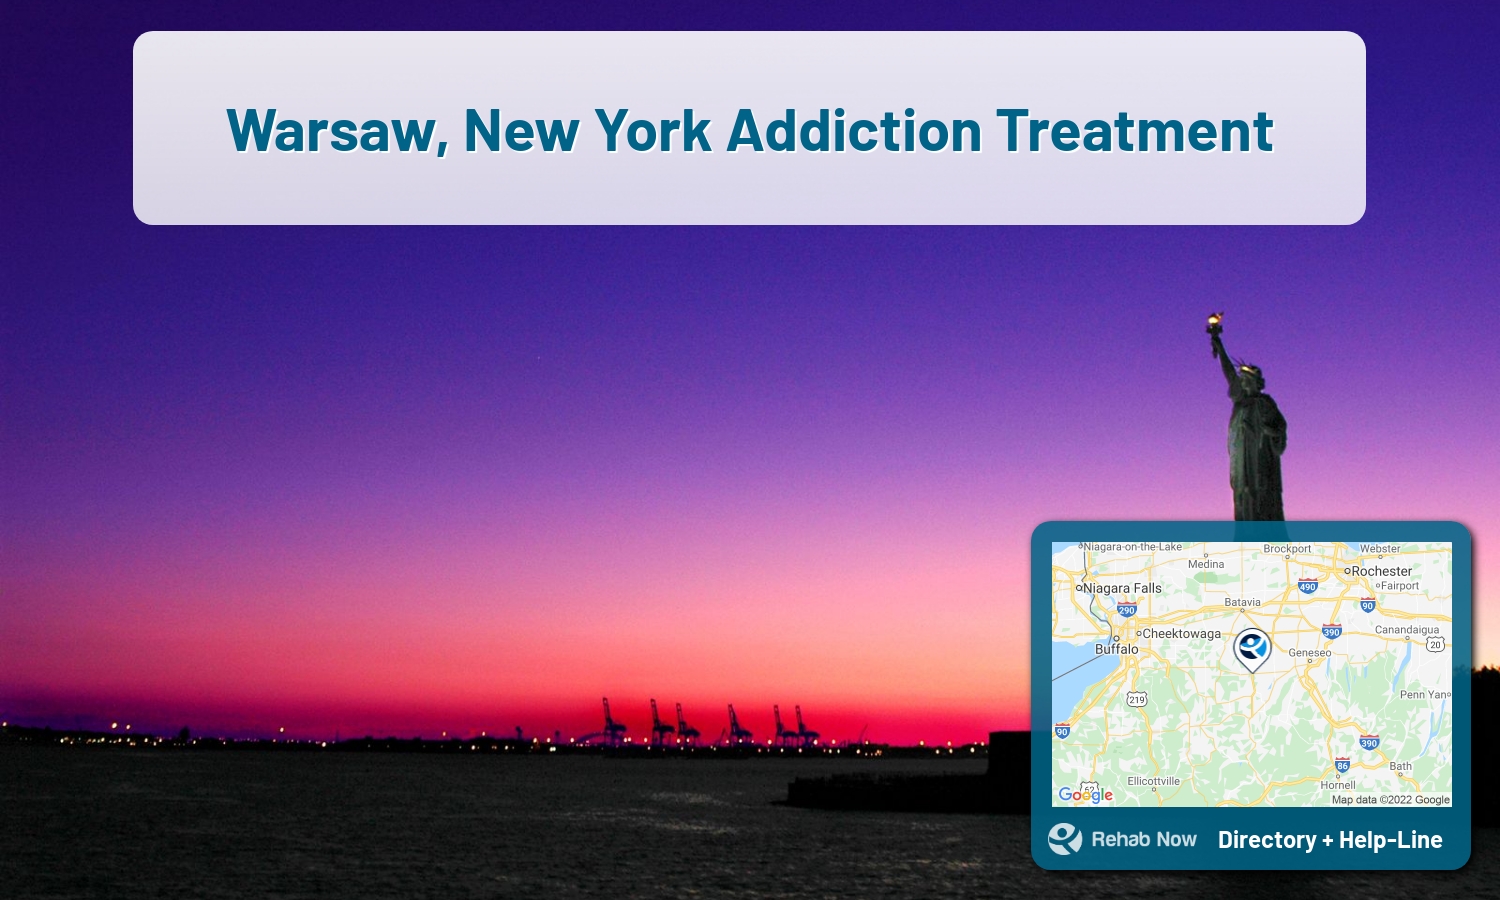 Drug rehab and alcohol treatment services nearby Warsaw, NY. Need help choosing a treatment program? Call our free hotline!